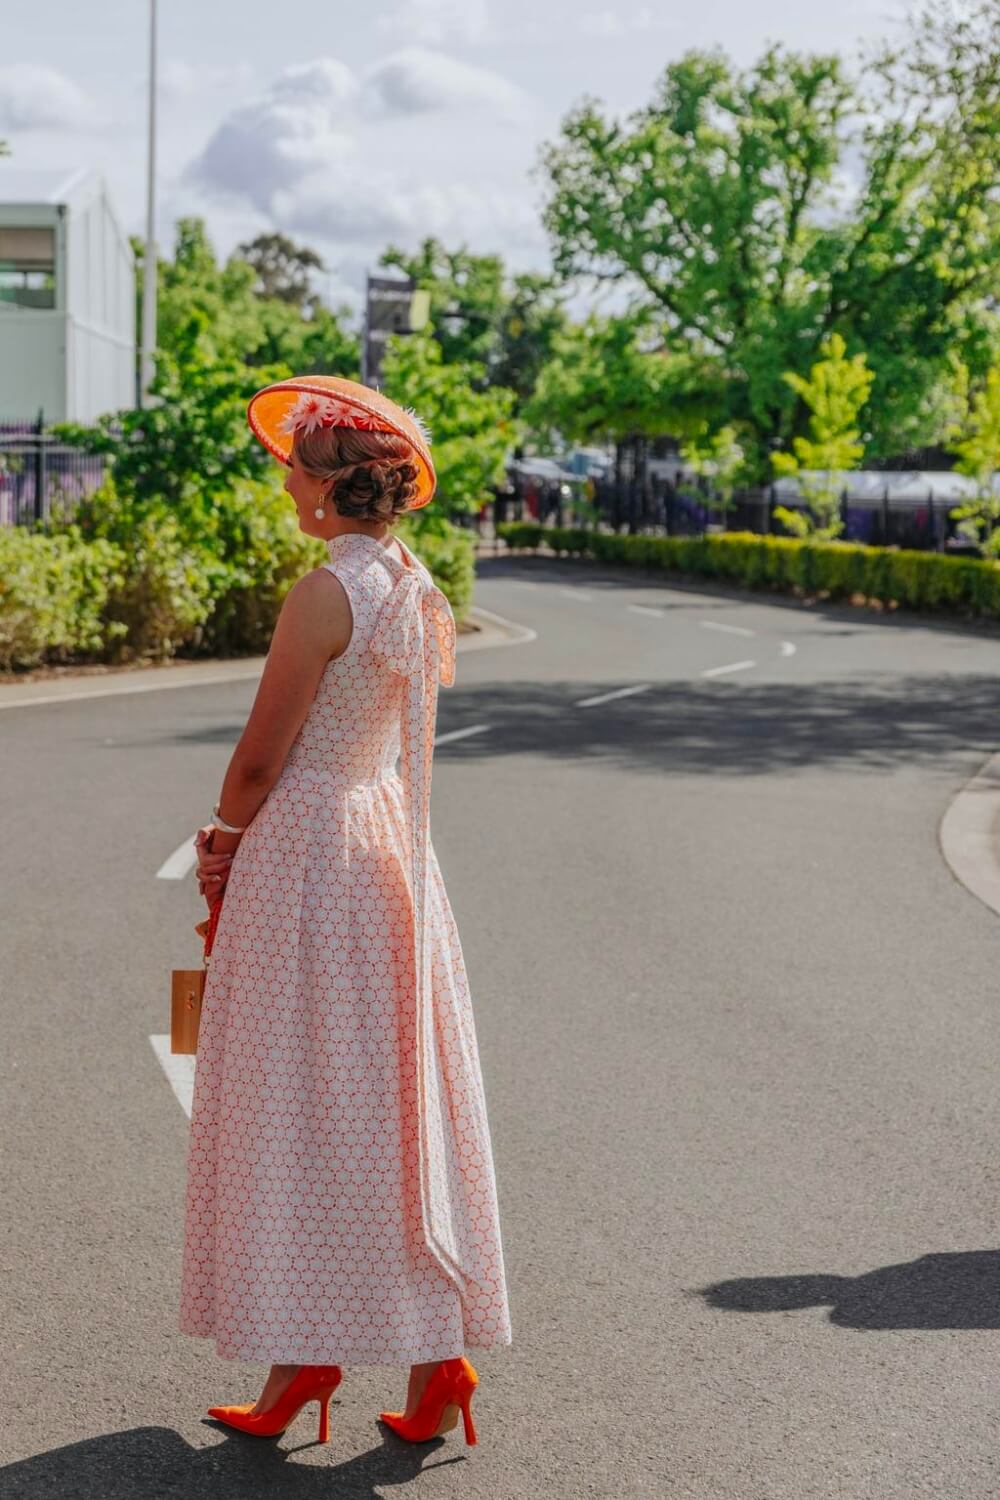 Women Dressed Up at the Melbourne Spring Carnival